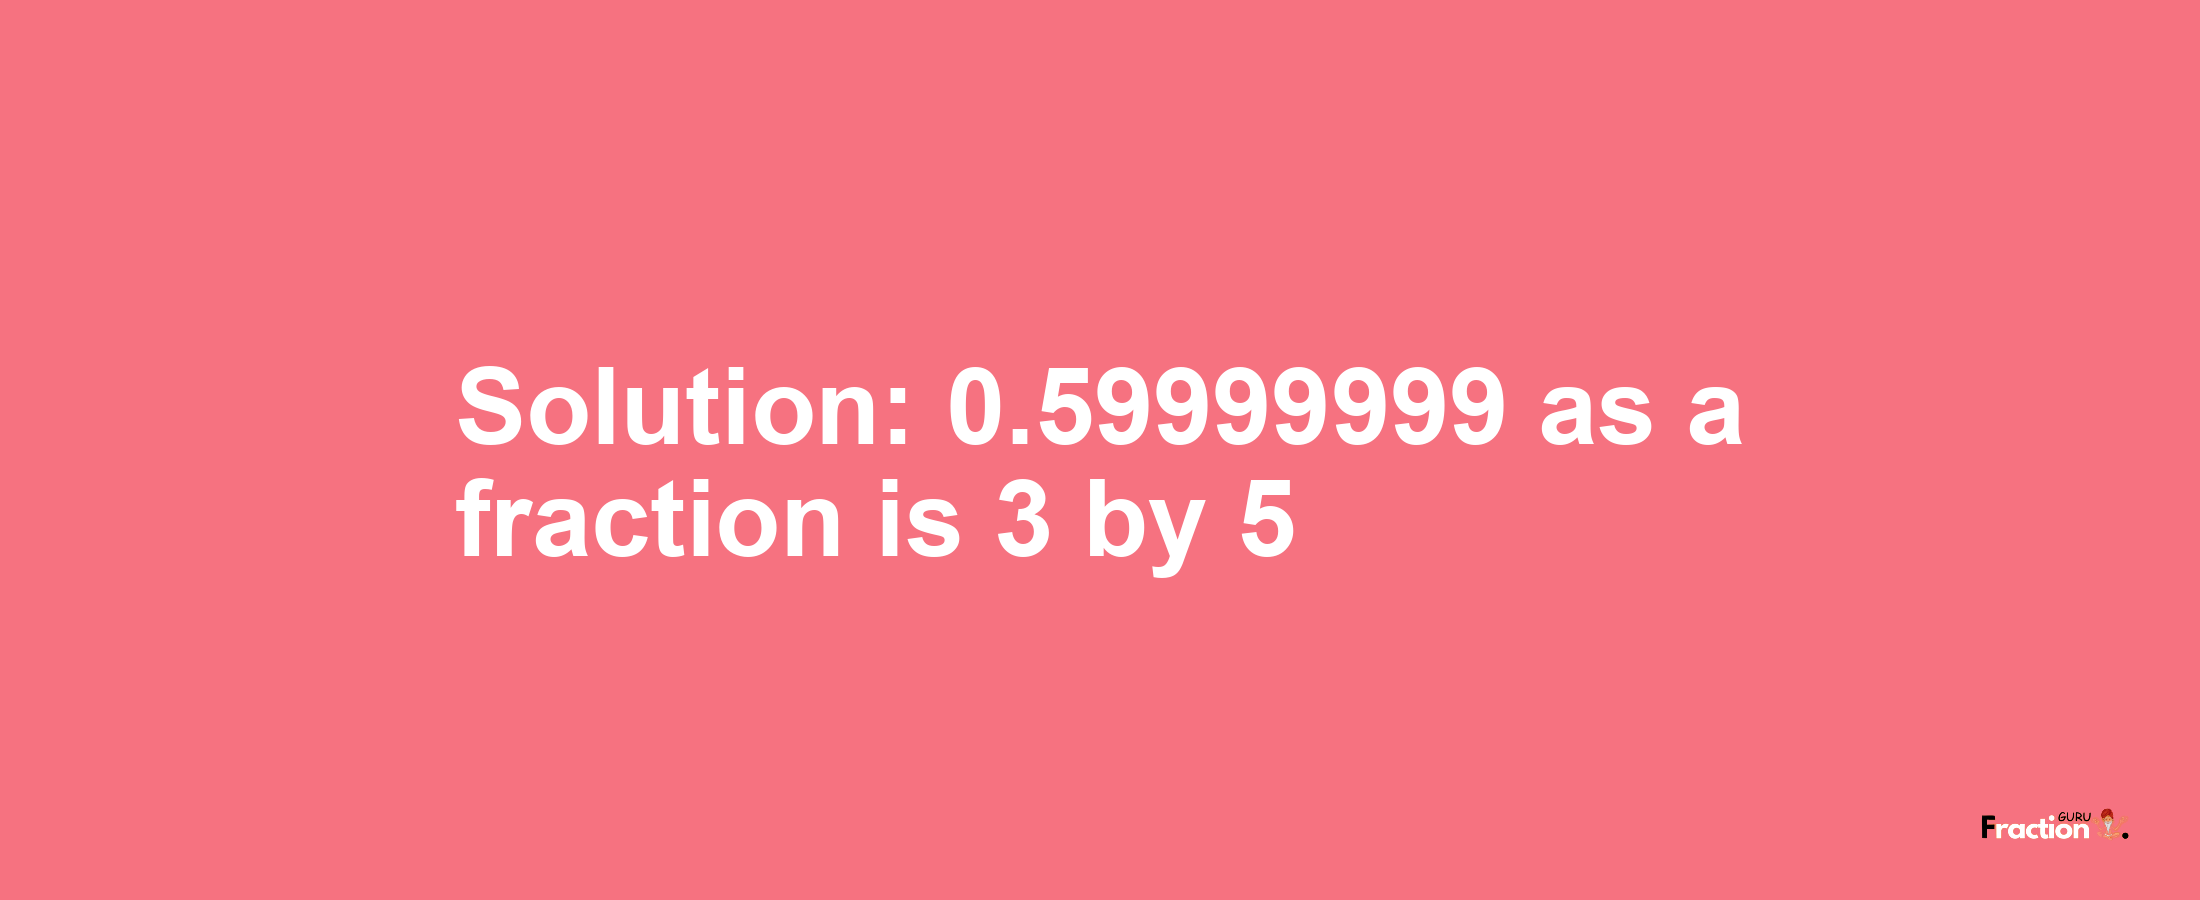 Solution:0.59999999 as a fraction is 3/5